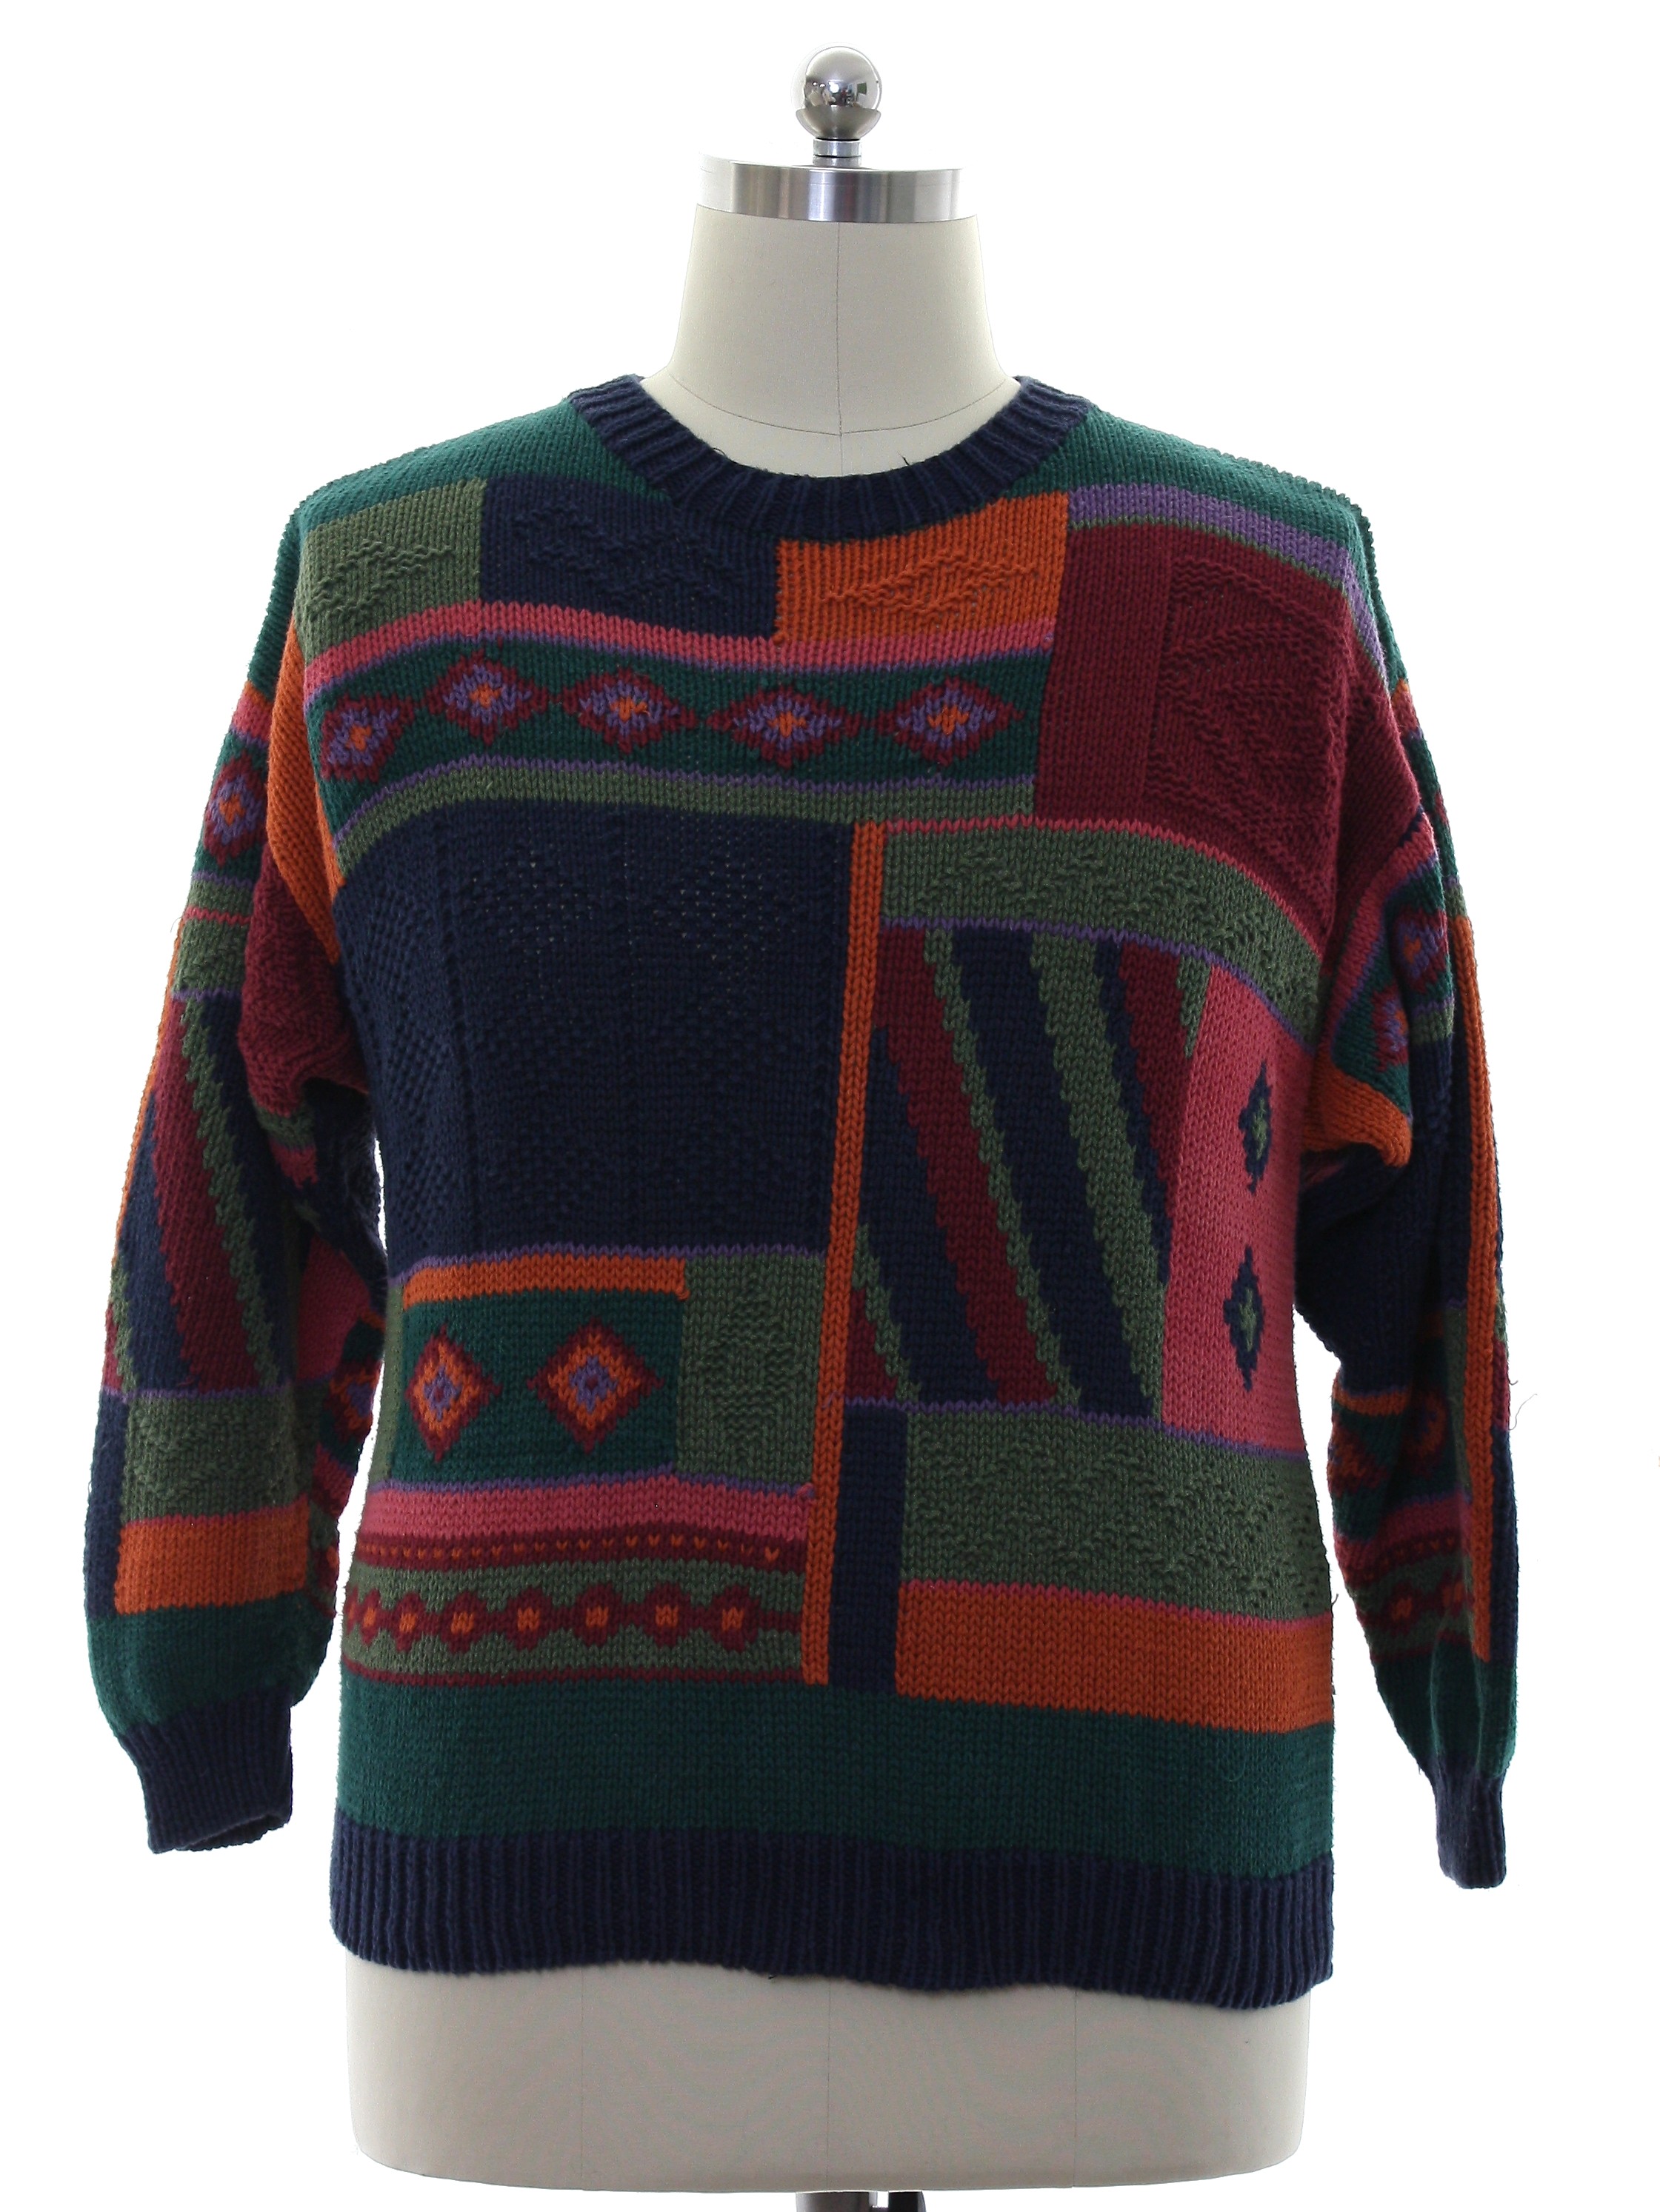 Woolrich 1980s Vintage Sweater: 80s style (made in late 90s or early ...